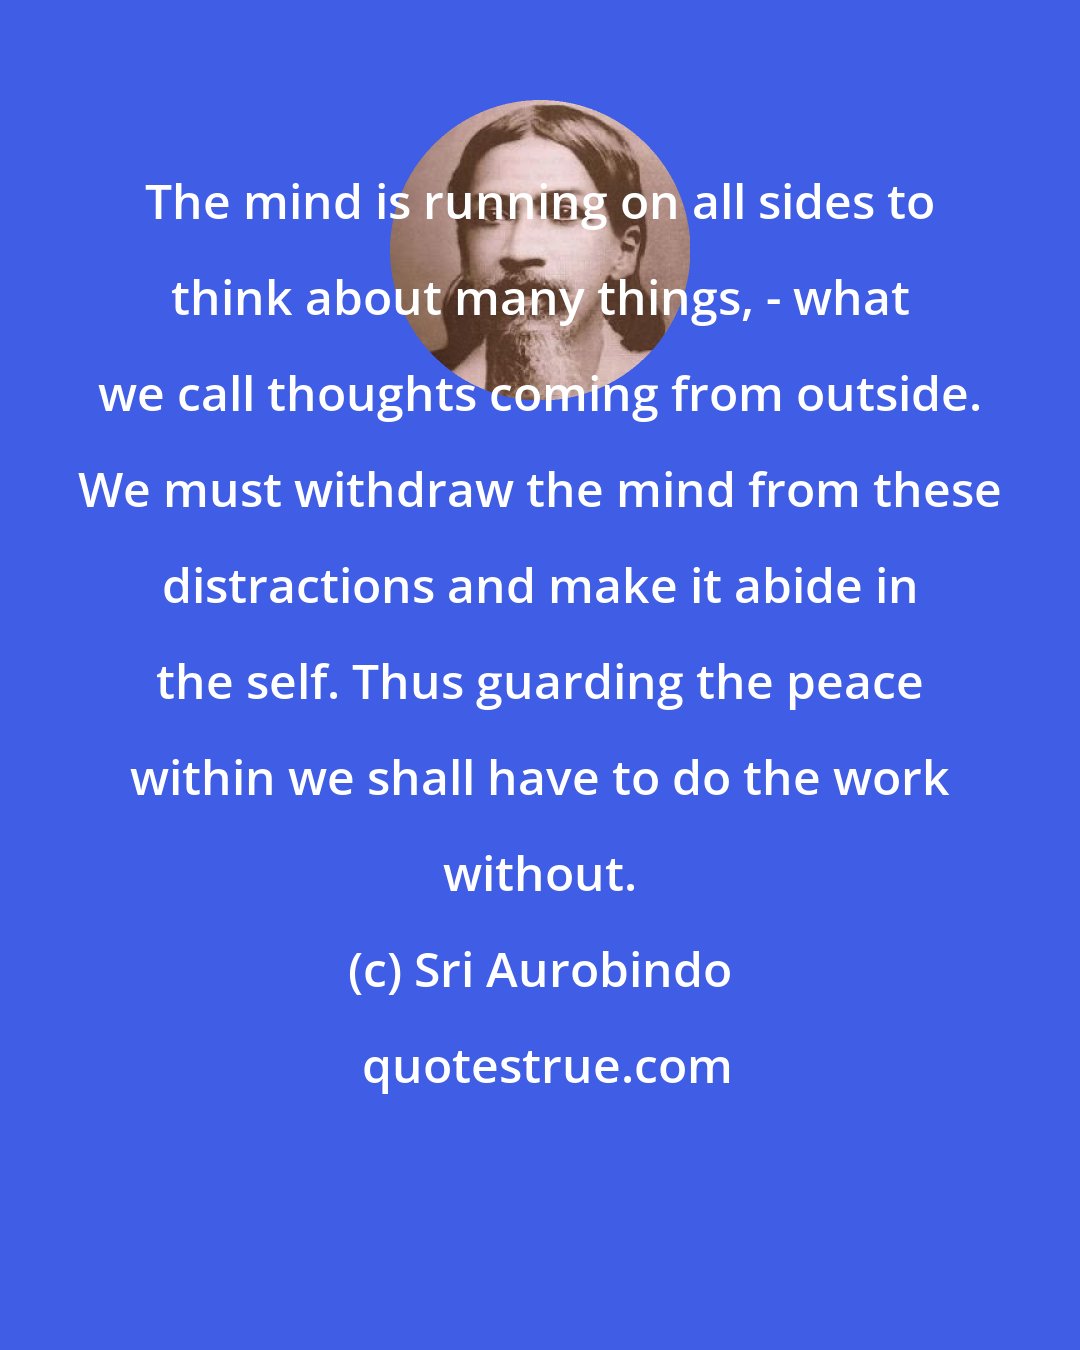 Sri Aurobindo: The mind is running on all sides to think about many things, - what we call thoughts coming from outside. We must withdraw the mind from these distractions and make it abide in the self. Thus guarding the peace within we shall have to do the work without.